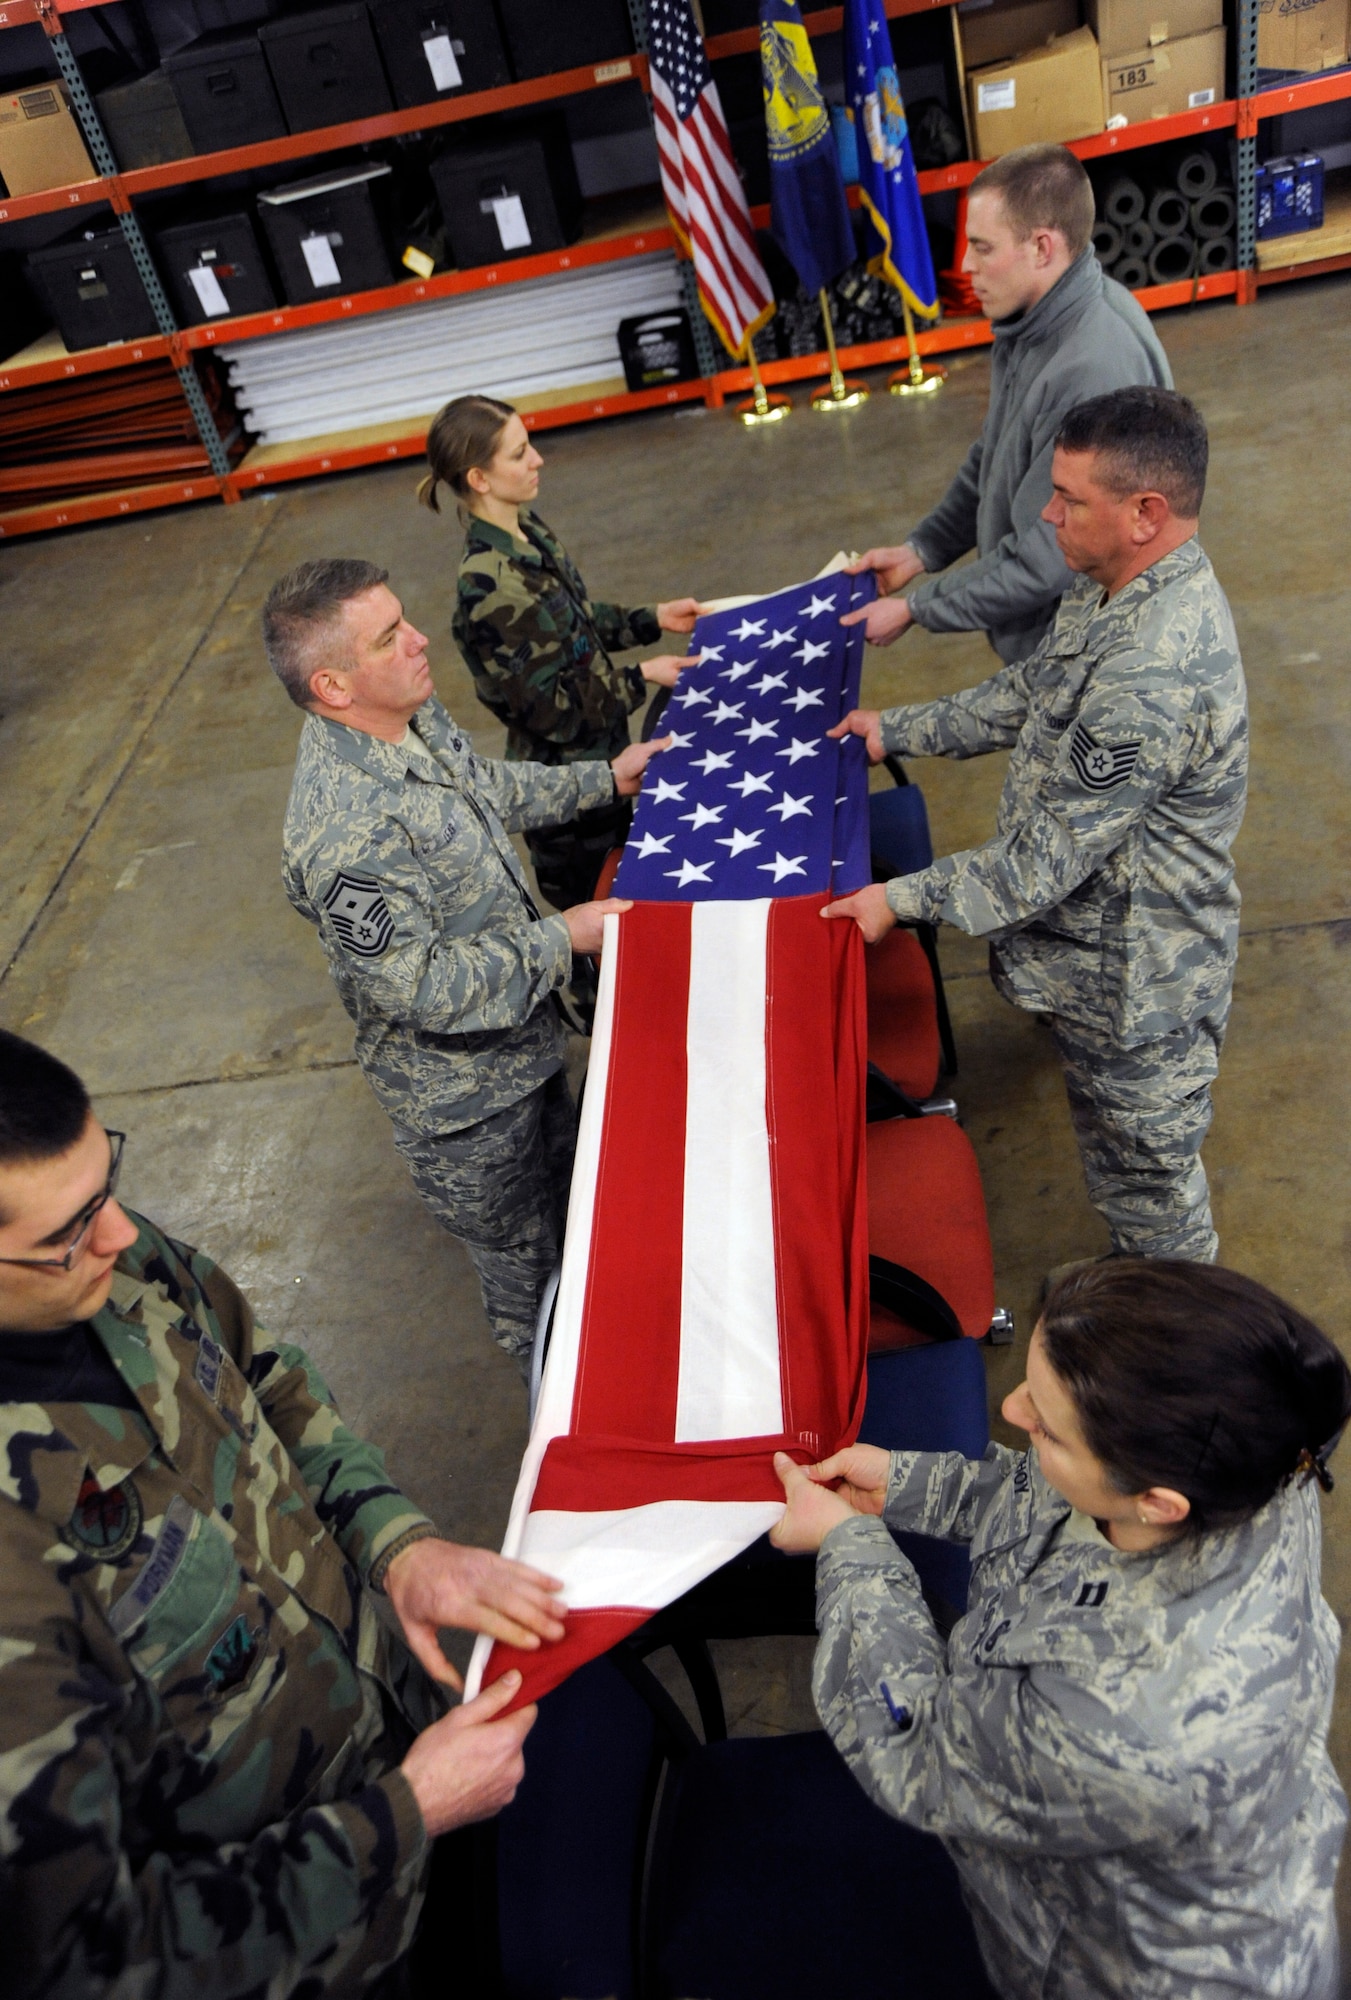 Oregon Air National Guardsmen practice folding a flag during 4 days of Honor Guard training at the Portland Air Naional Guard Base on February 24th, 2010.  (U.S. Air Force photograph by SSgt John Hughel, 142nd Fighter Wing Public Affairs)